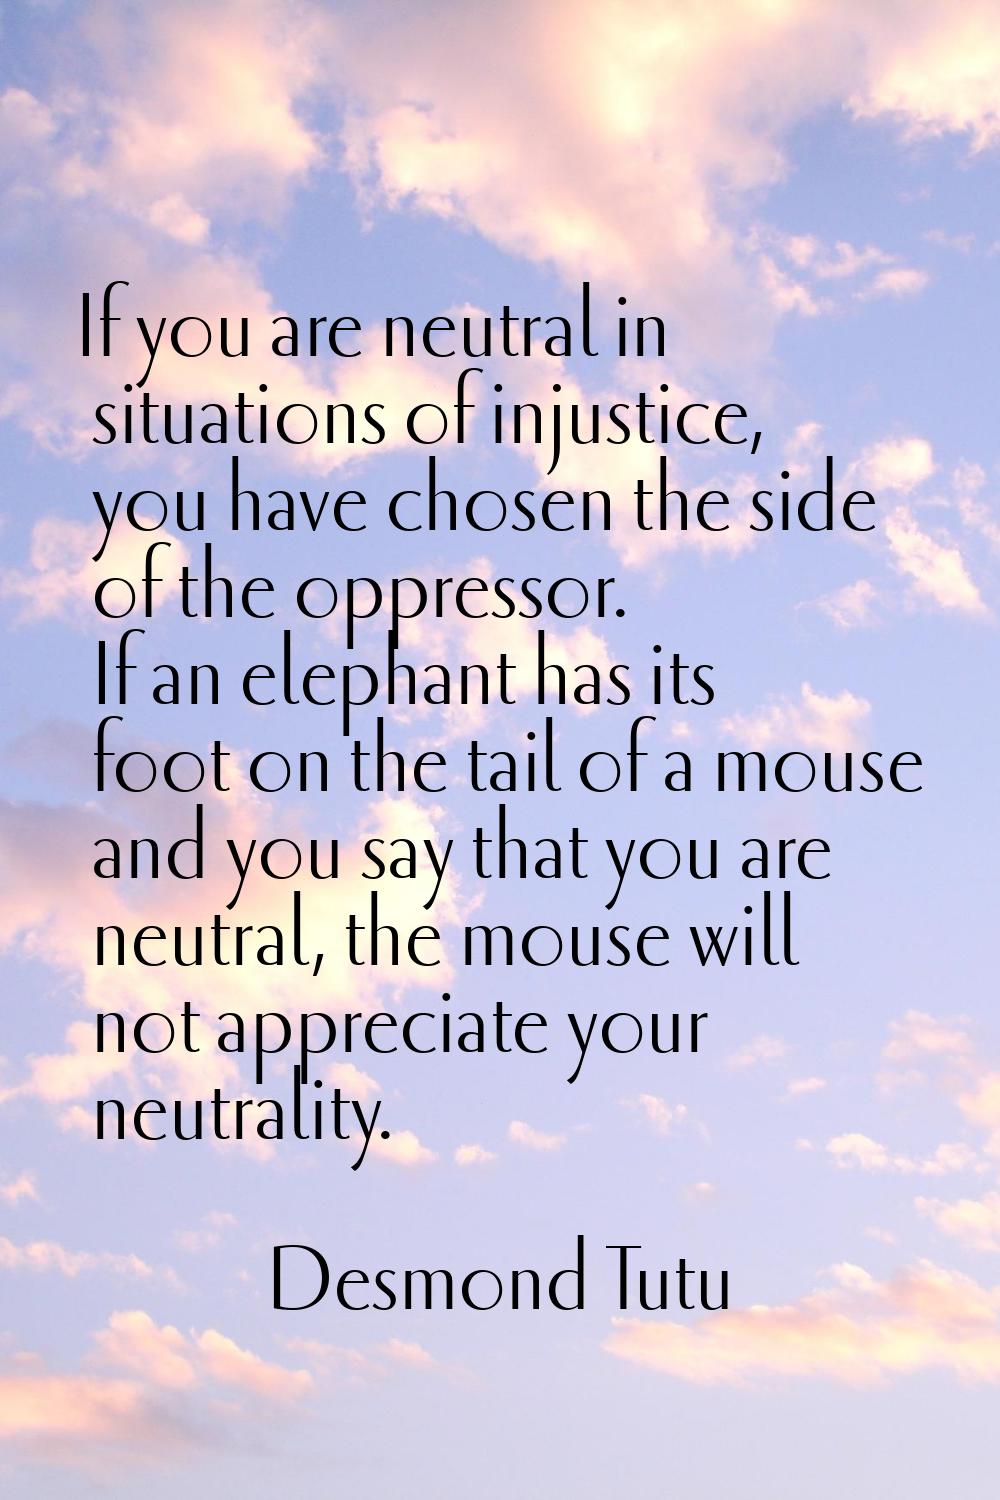 If you are neutral in situations of injustice, you have chosen the side of the oppressor. If an ele